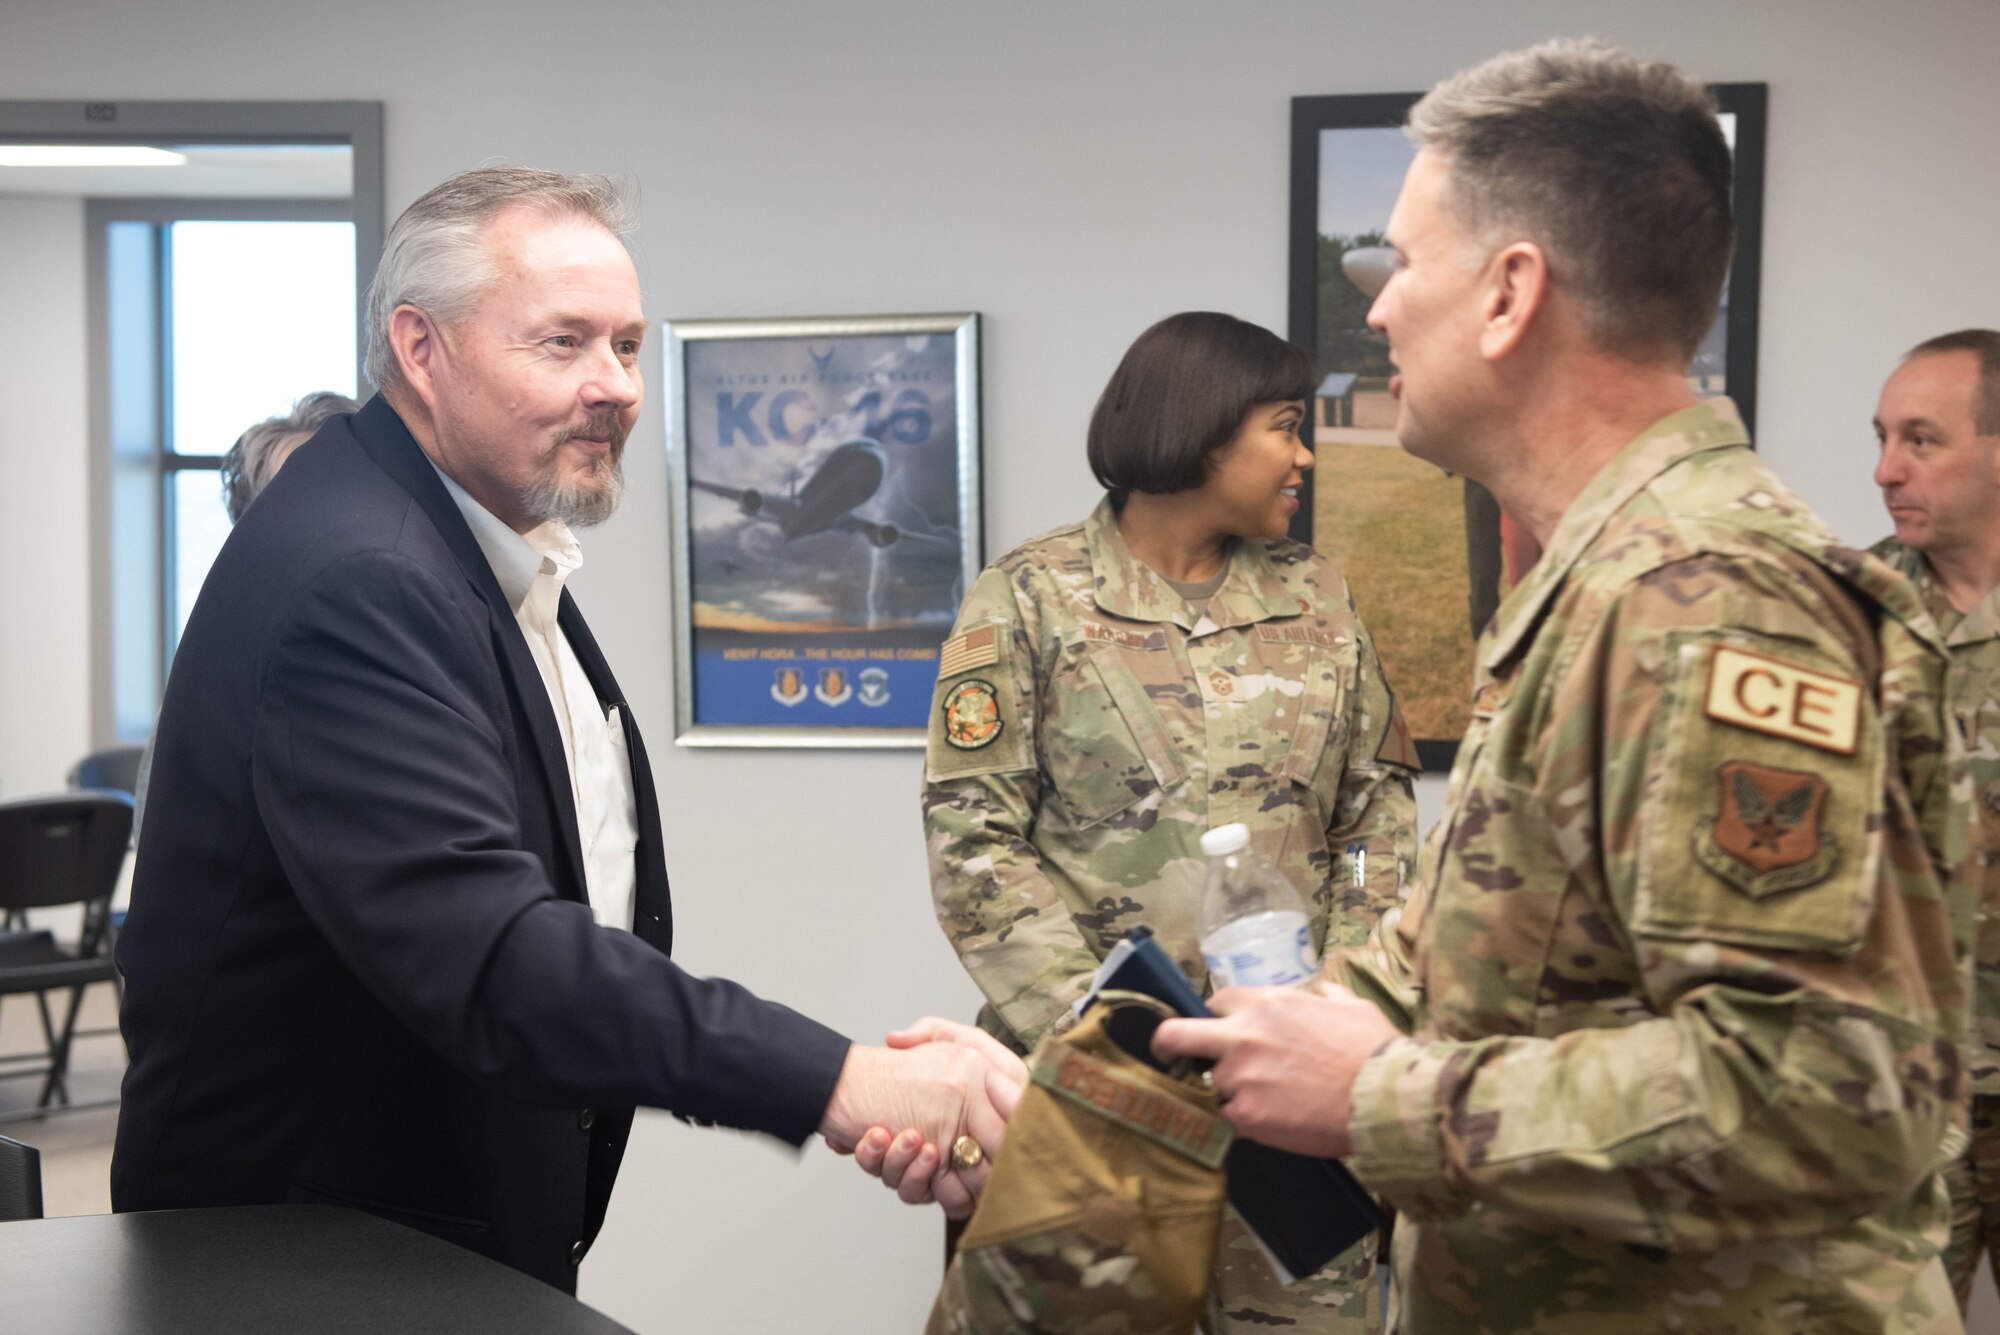 Rodger Kerr, Altus Chamber of Commerce president and CEO, meets U.S. Air Force Brig. Gen. Brian Hartless, Air Force director of engineers, at the military spouse coworking space at Altus, Oklahoma, Jan. 20, 2023. Base and community leaders worked together to create the spouse coworking space in June 2021 to provide a dedicated place for military spouses to mingle with the local community, network with local employers, and focus on their careers. (U.S. Air Force photo by 2nd Lt. Charlie Nichols)